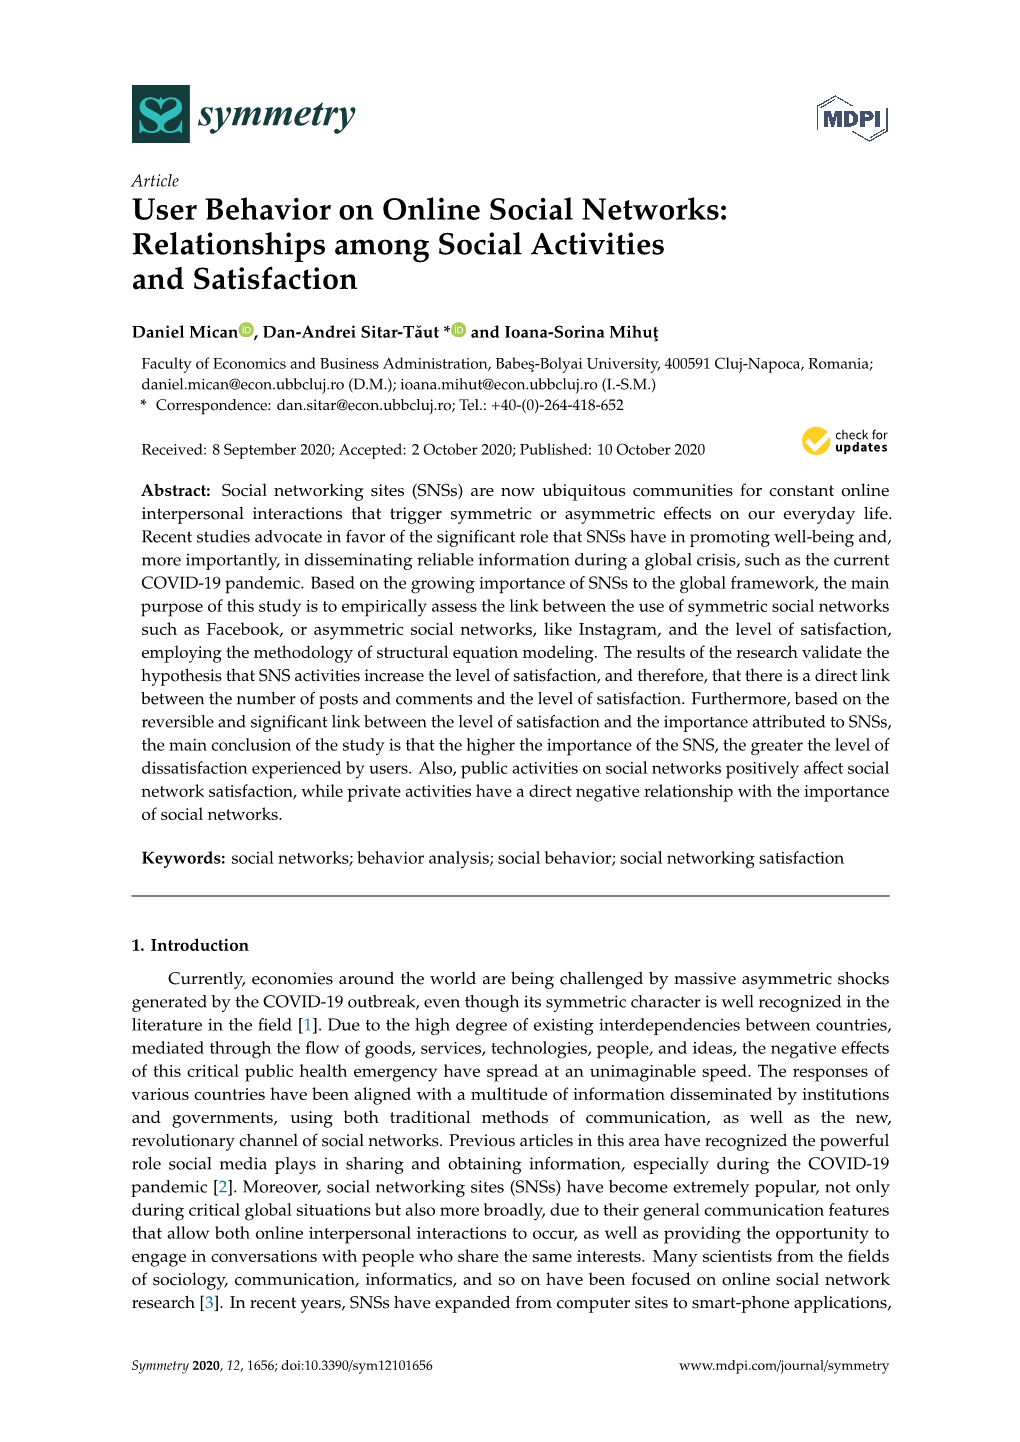 User Behavior on Online Social Networks: Relationships Among Social Activities and Satisfaction